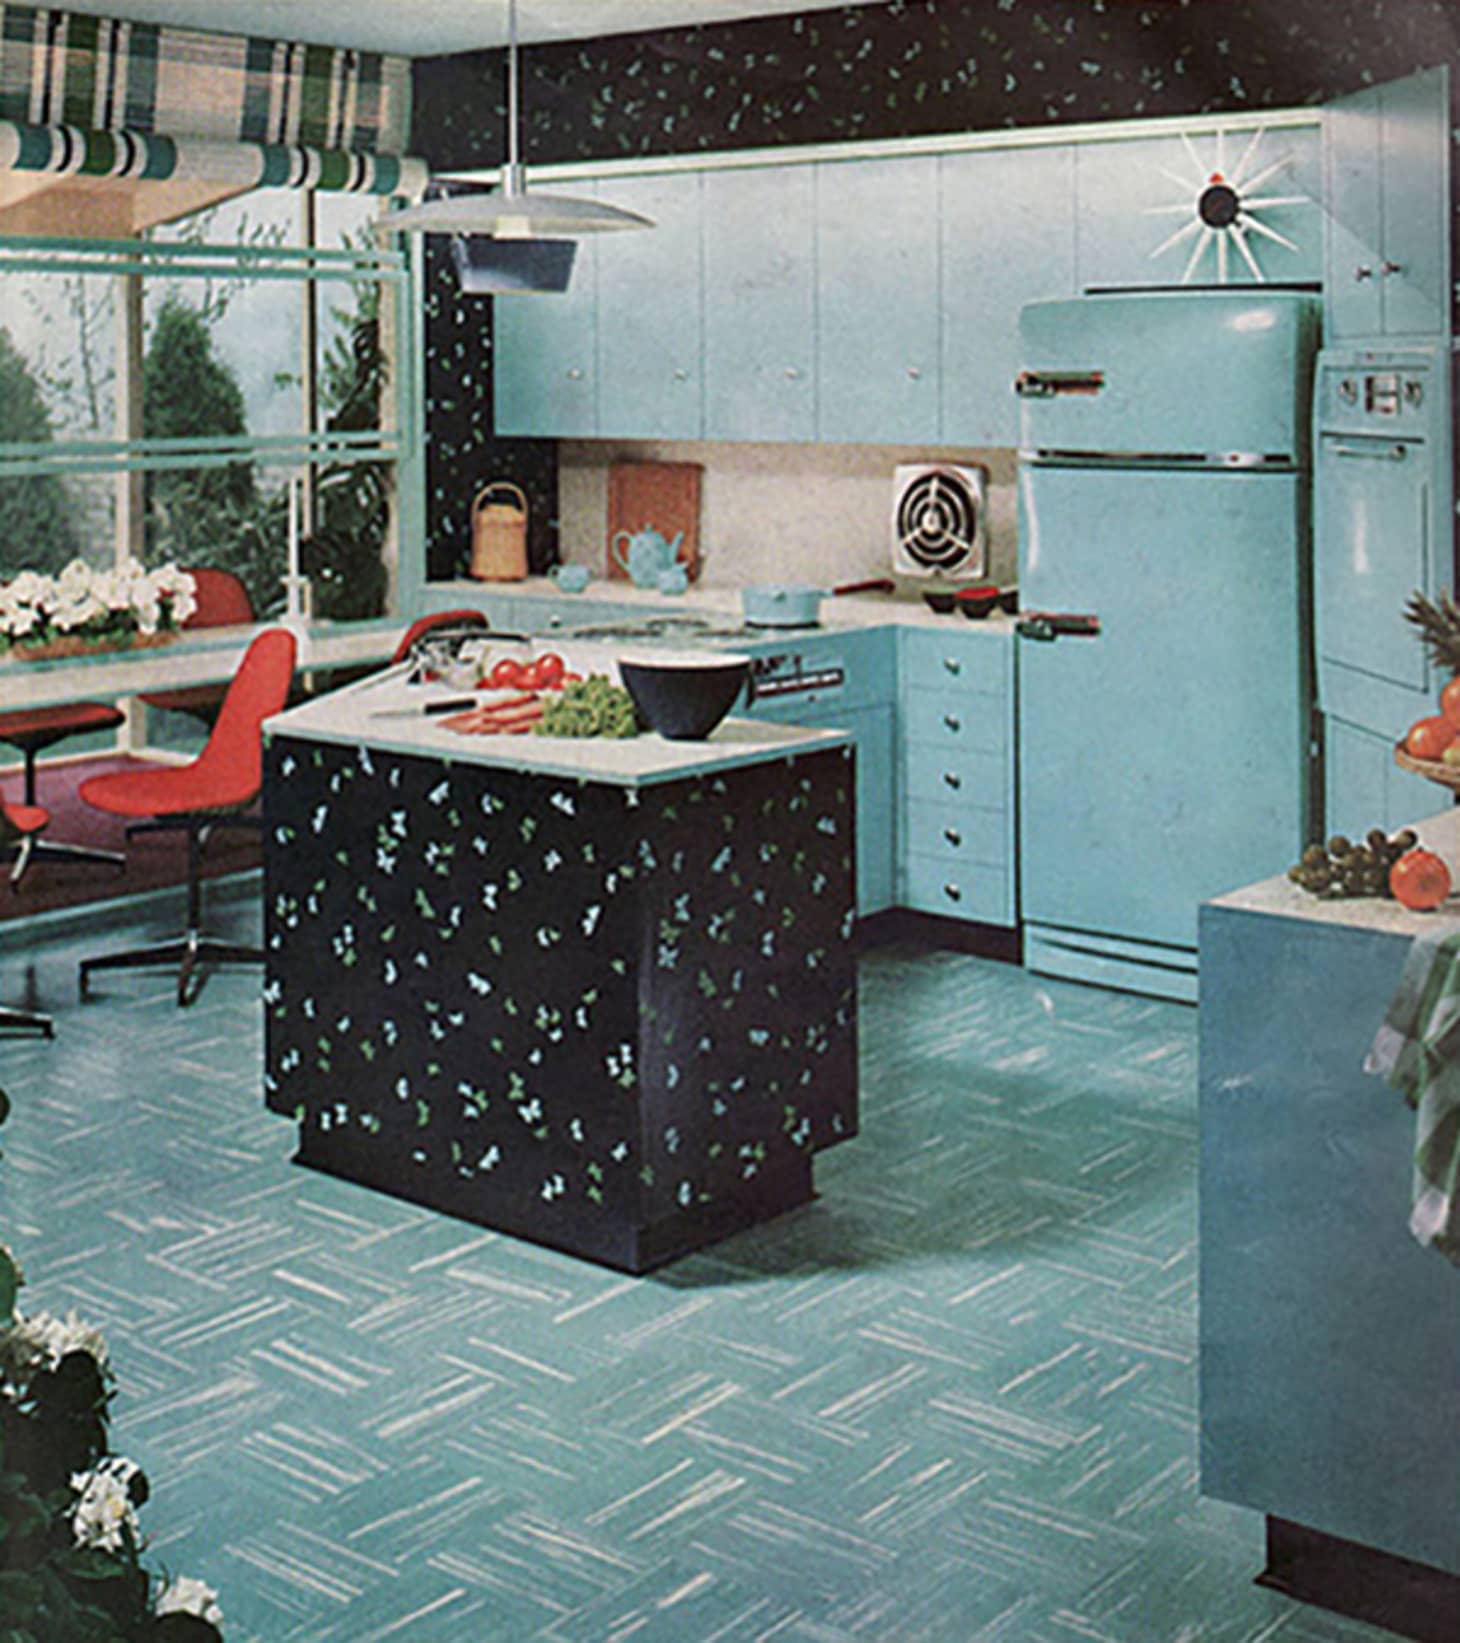 Brief History Of The Kitchen From The 1950s To 1960s Apartment